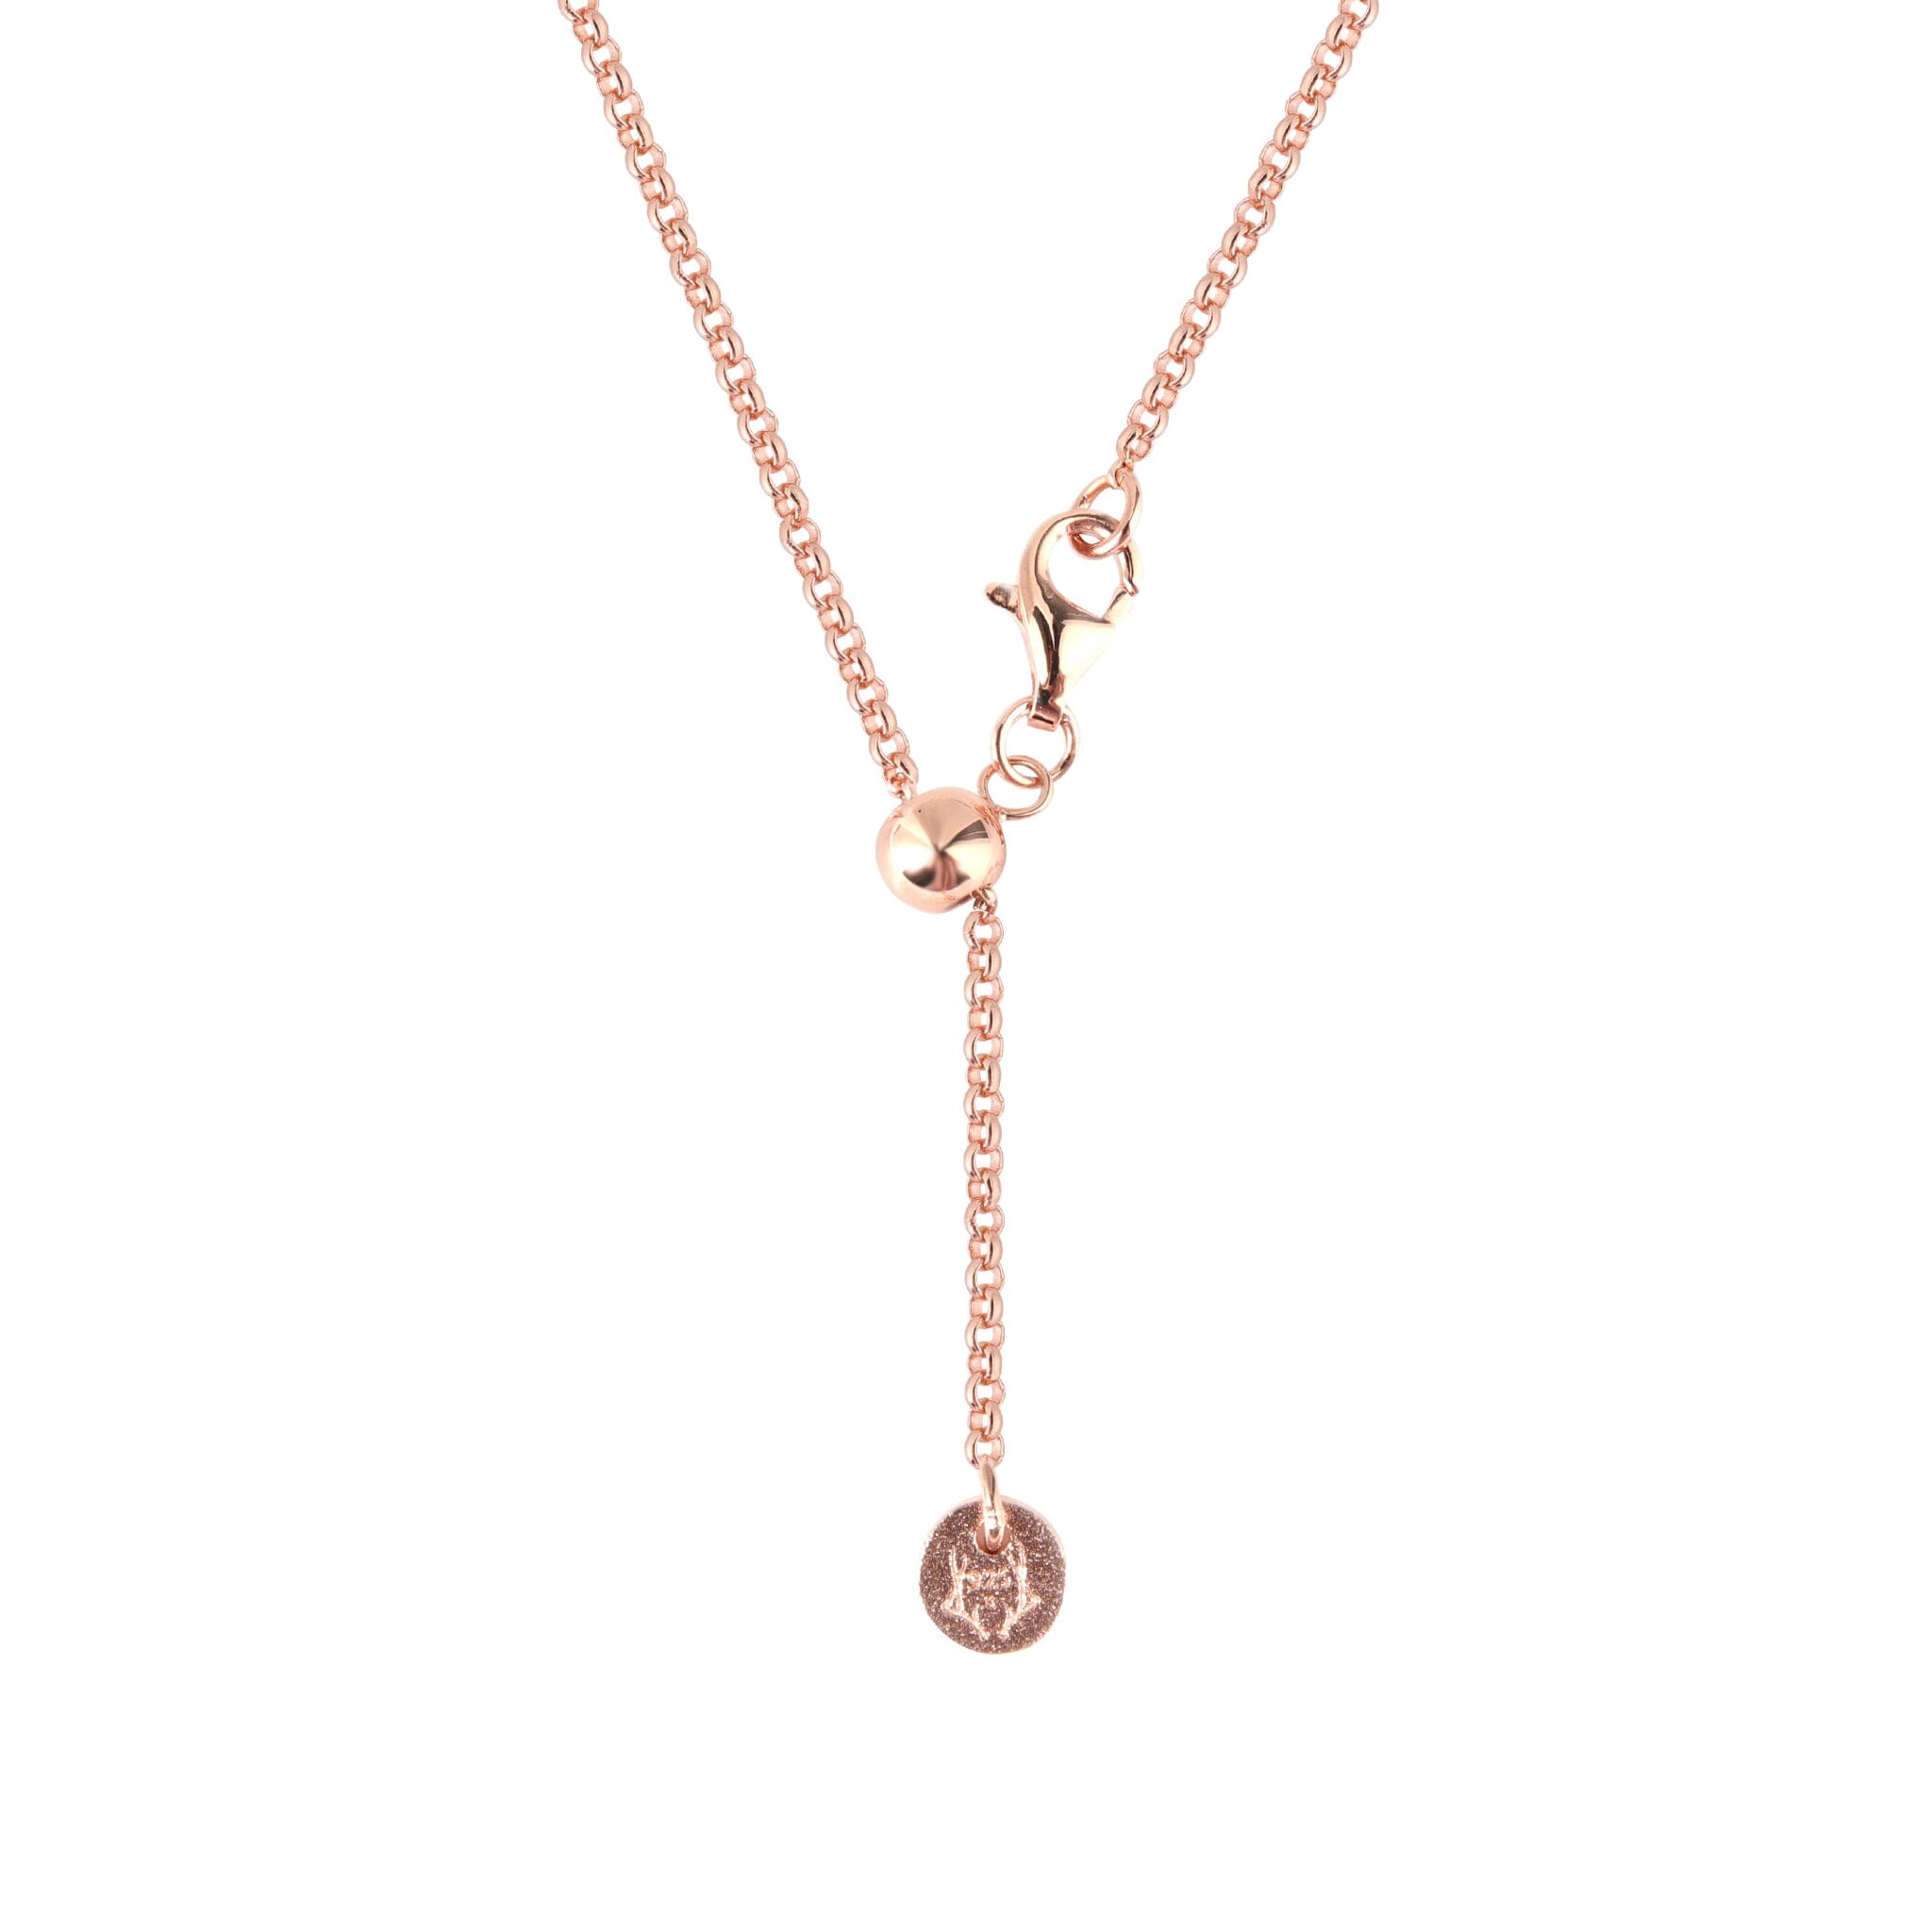 Women's Rose Gold Plated Sphere Necklace Locket with Meteorite Necklaces WAA FASHION GROUP 